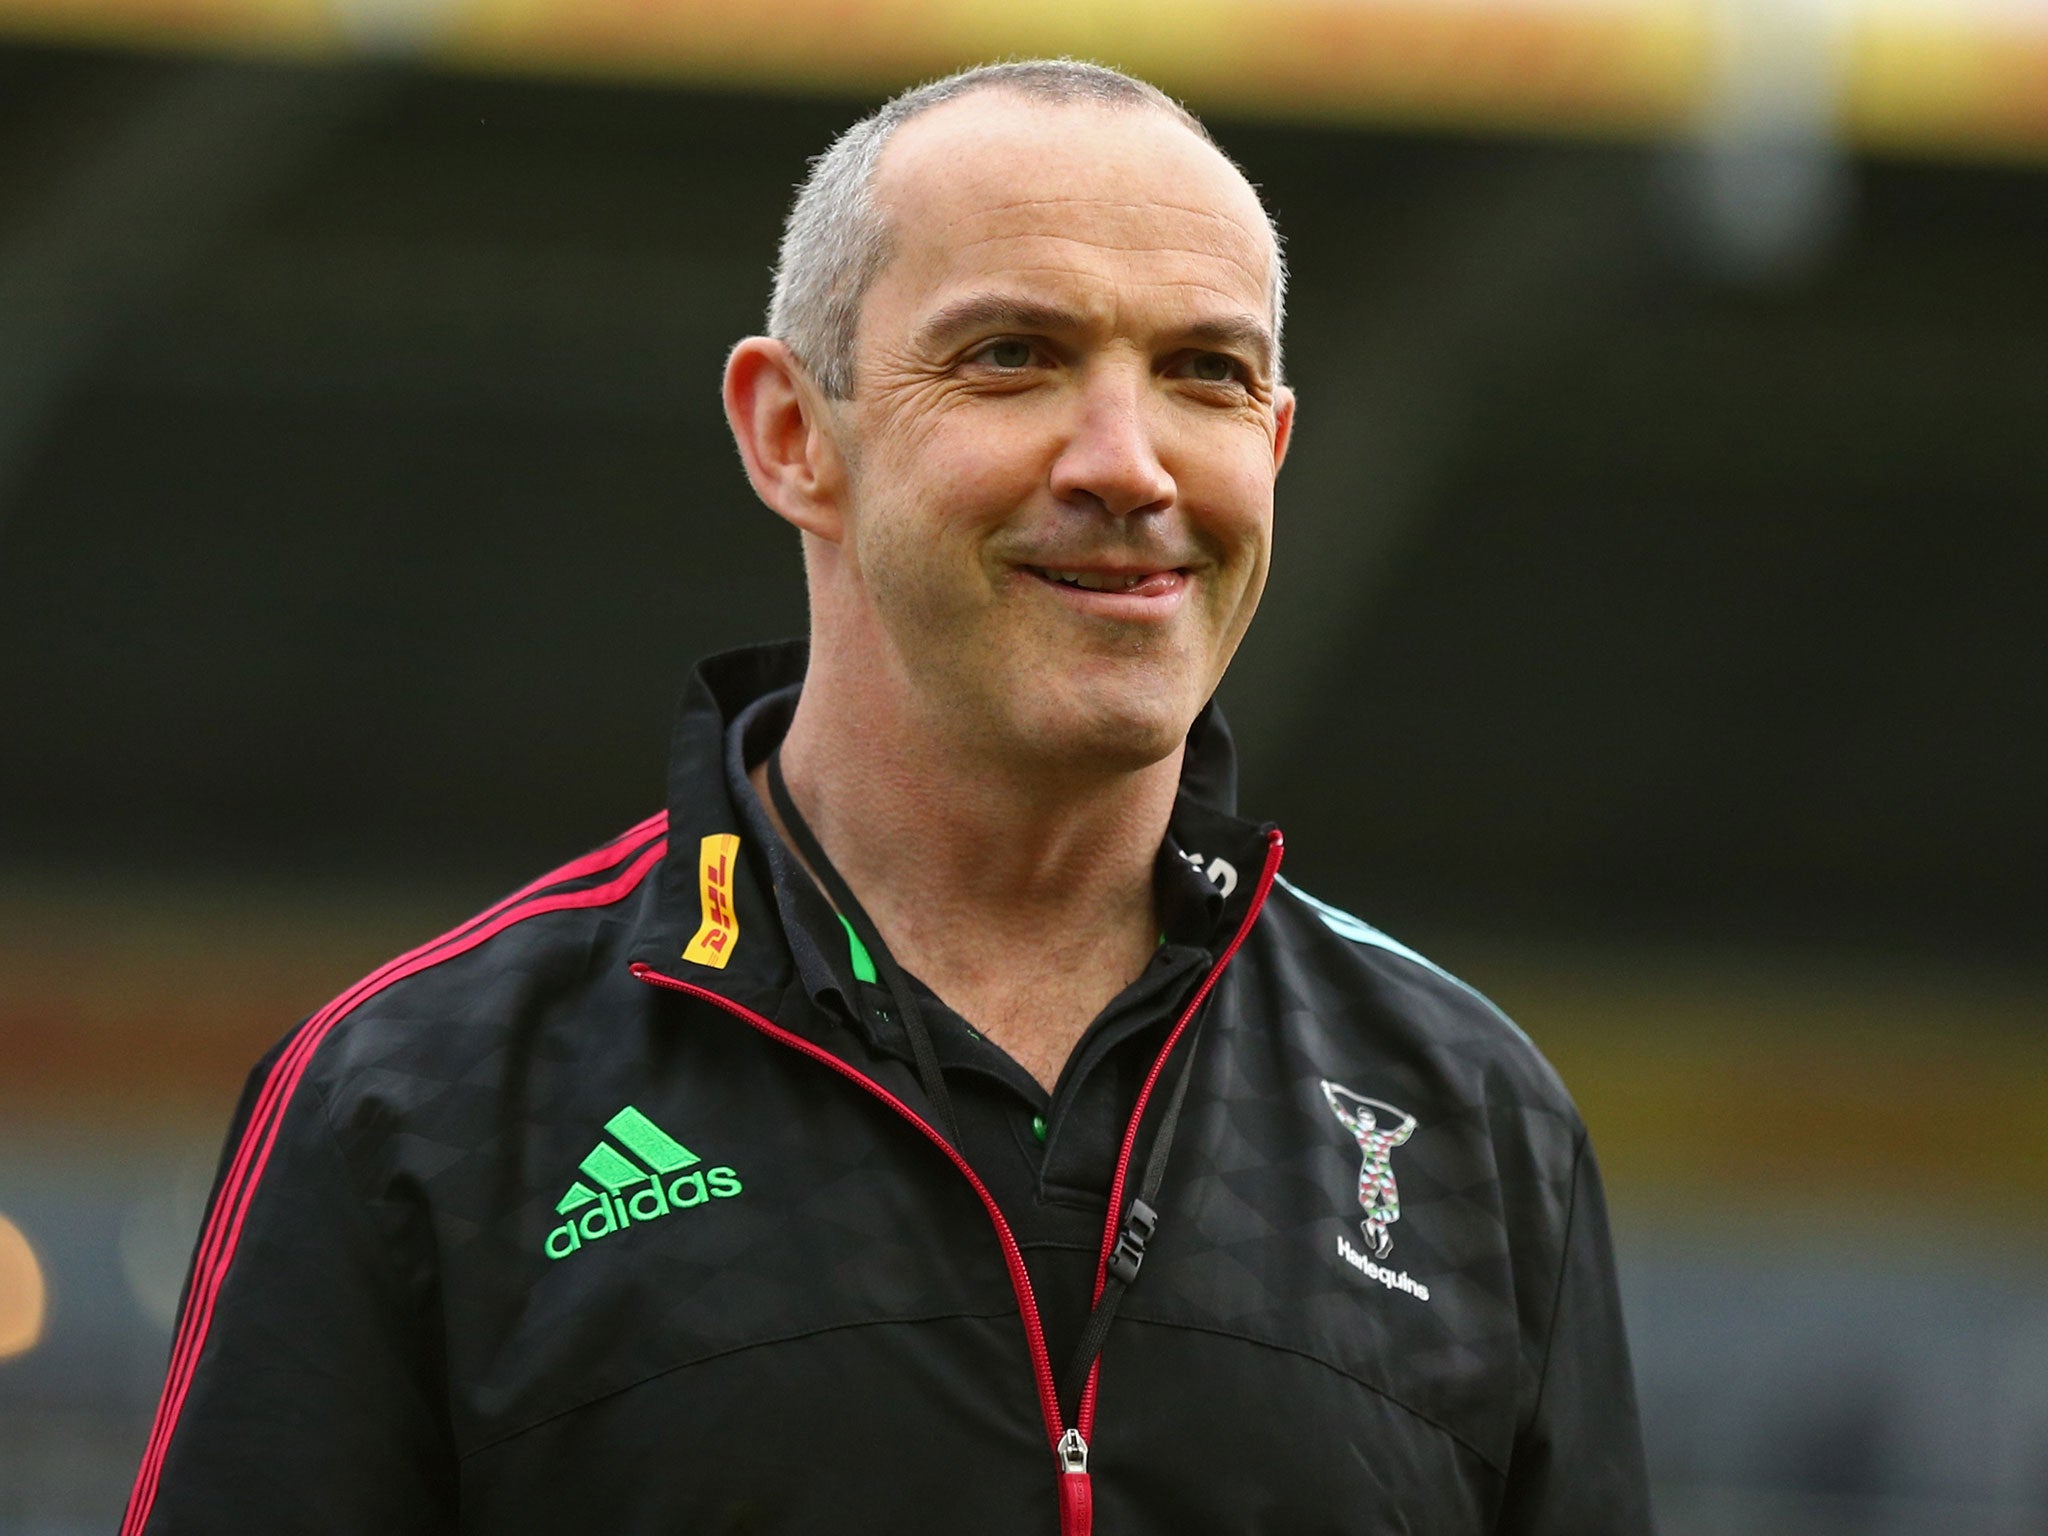 Harlequins director of rugby Conor O'Shea will leave the club at the end of the season